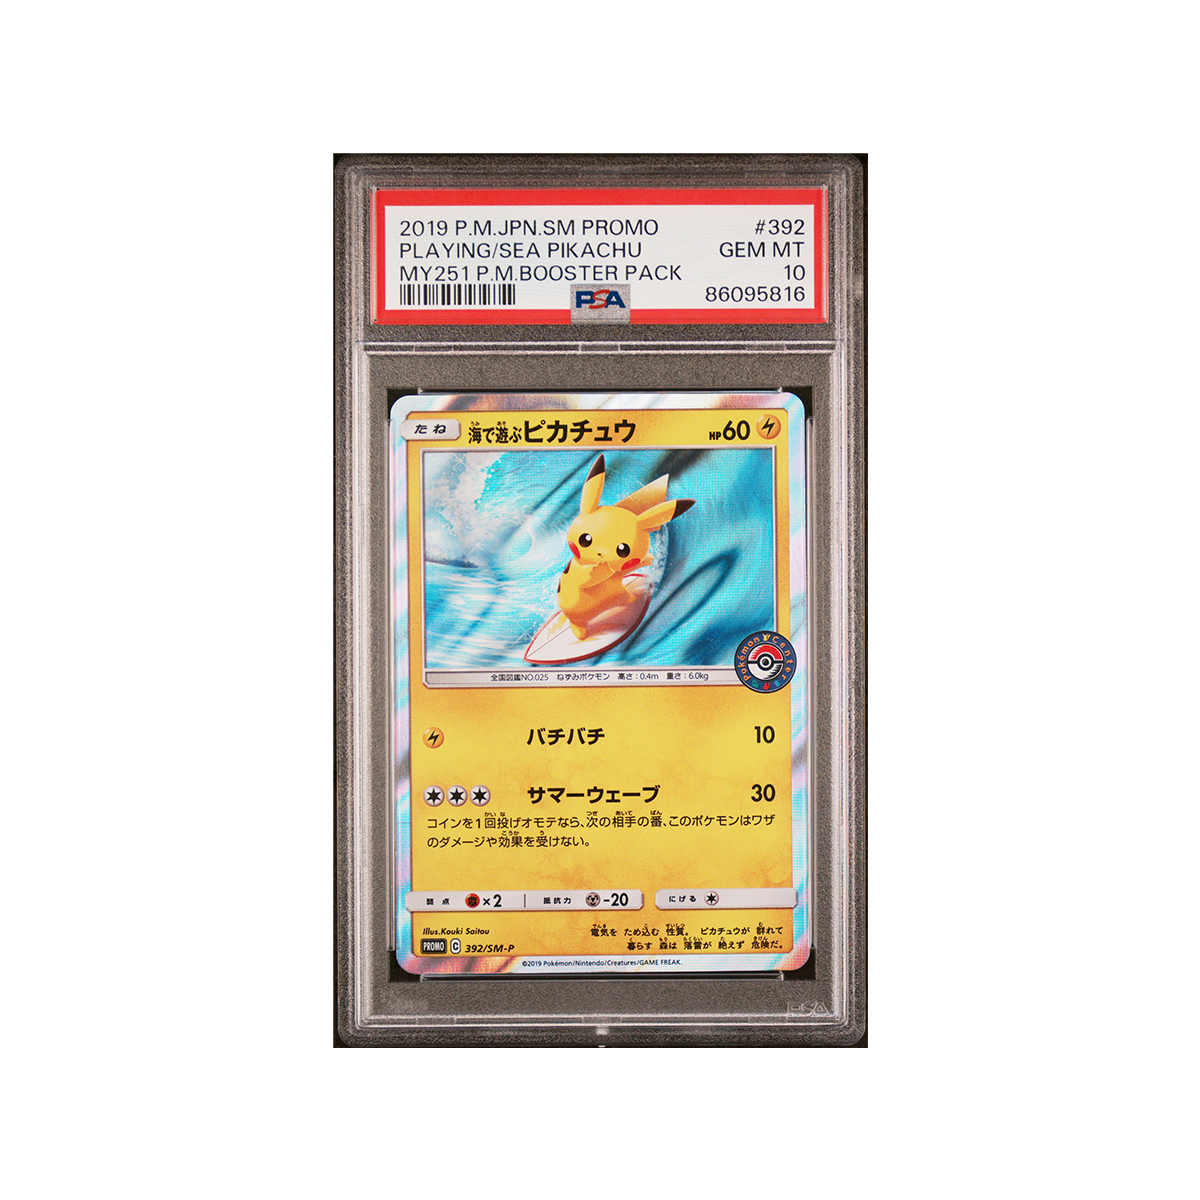 Playing in the Sea Pikachu (SM-P 392) PSA 10